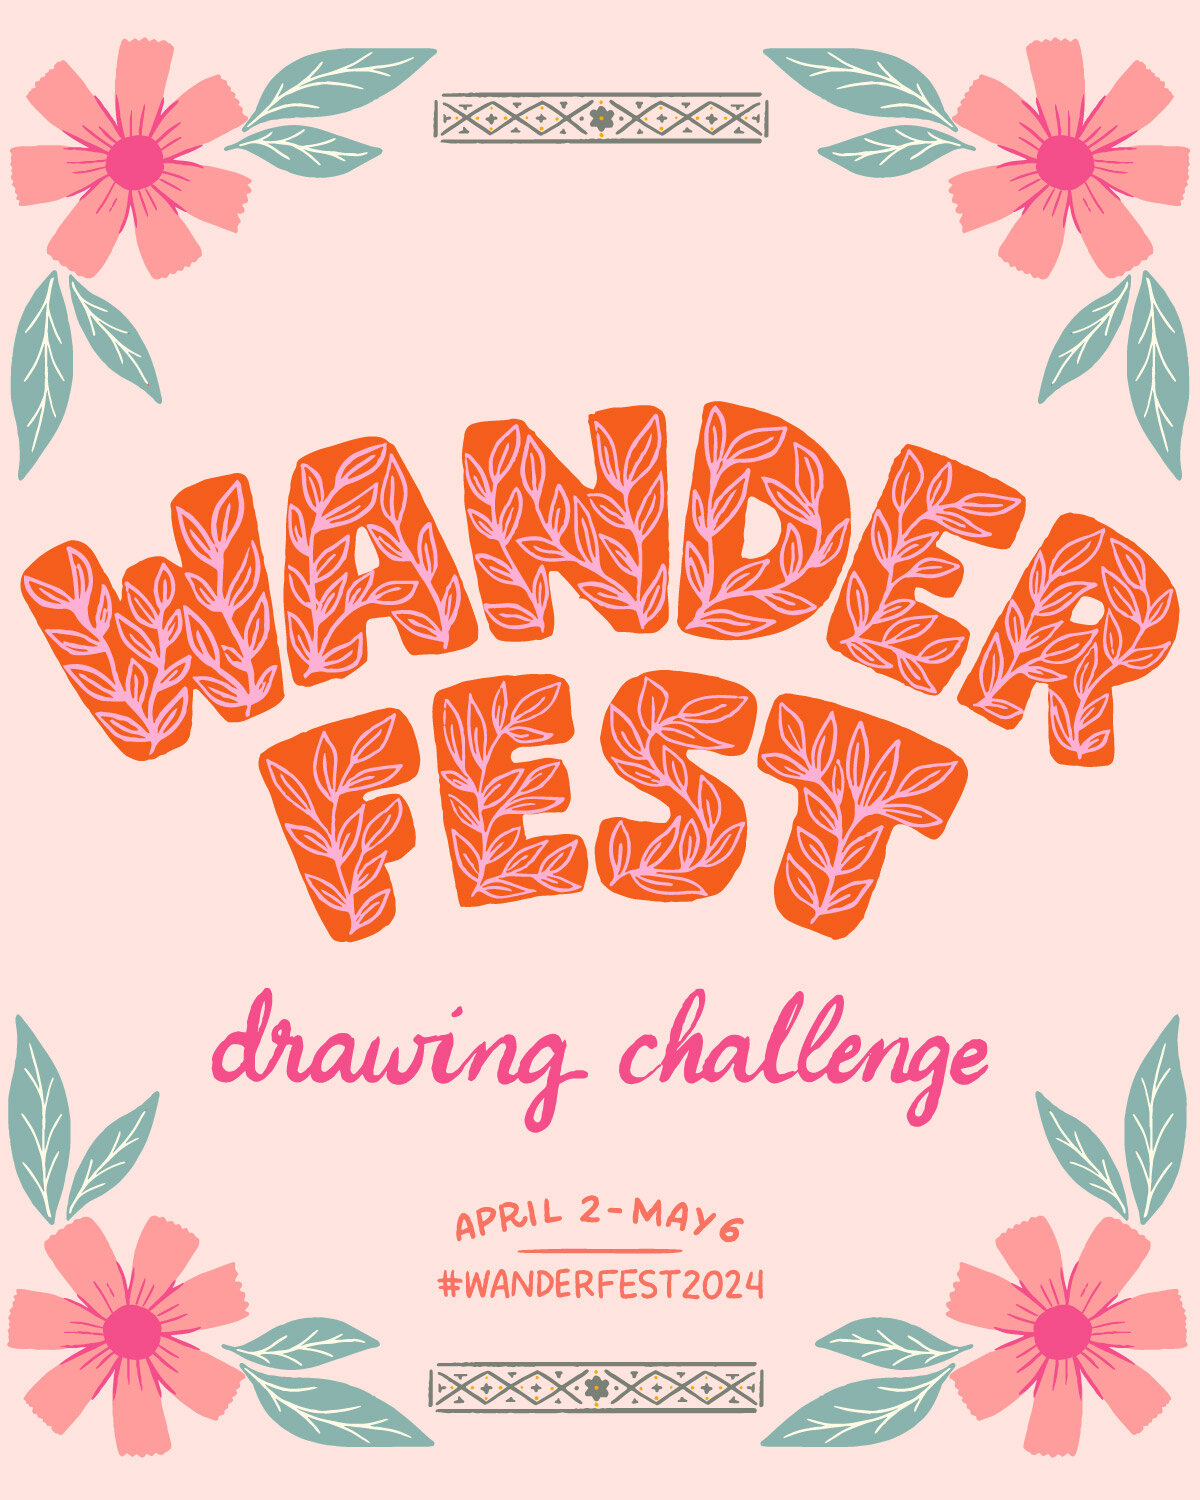 Fun new drawing challenge coming your way! Travel the world through your imagination and create beautiful art with these festival-inspired prompts. The challenge runs from April 2-May 6 and you have a week for each of the prompts!

Rules are simple:
